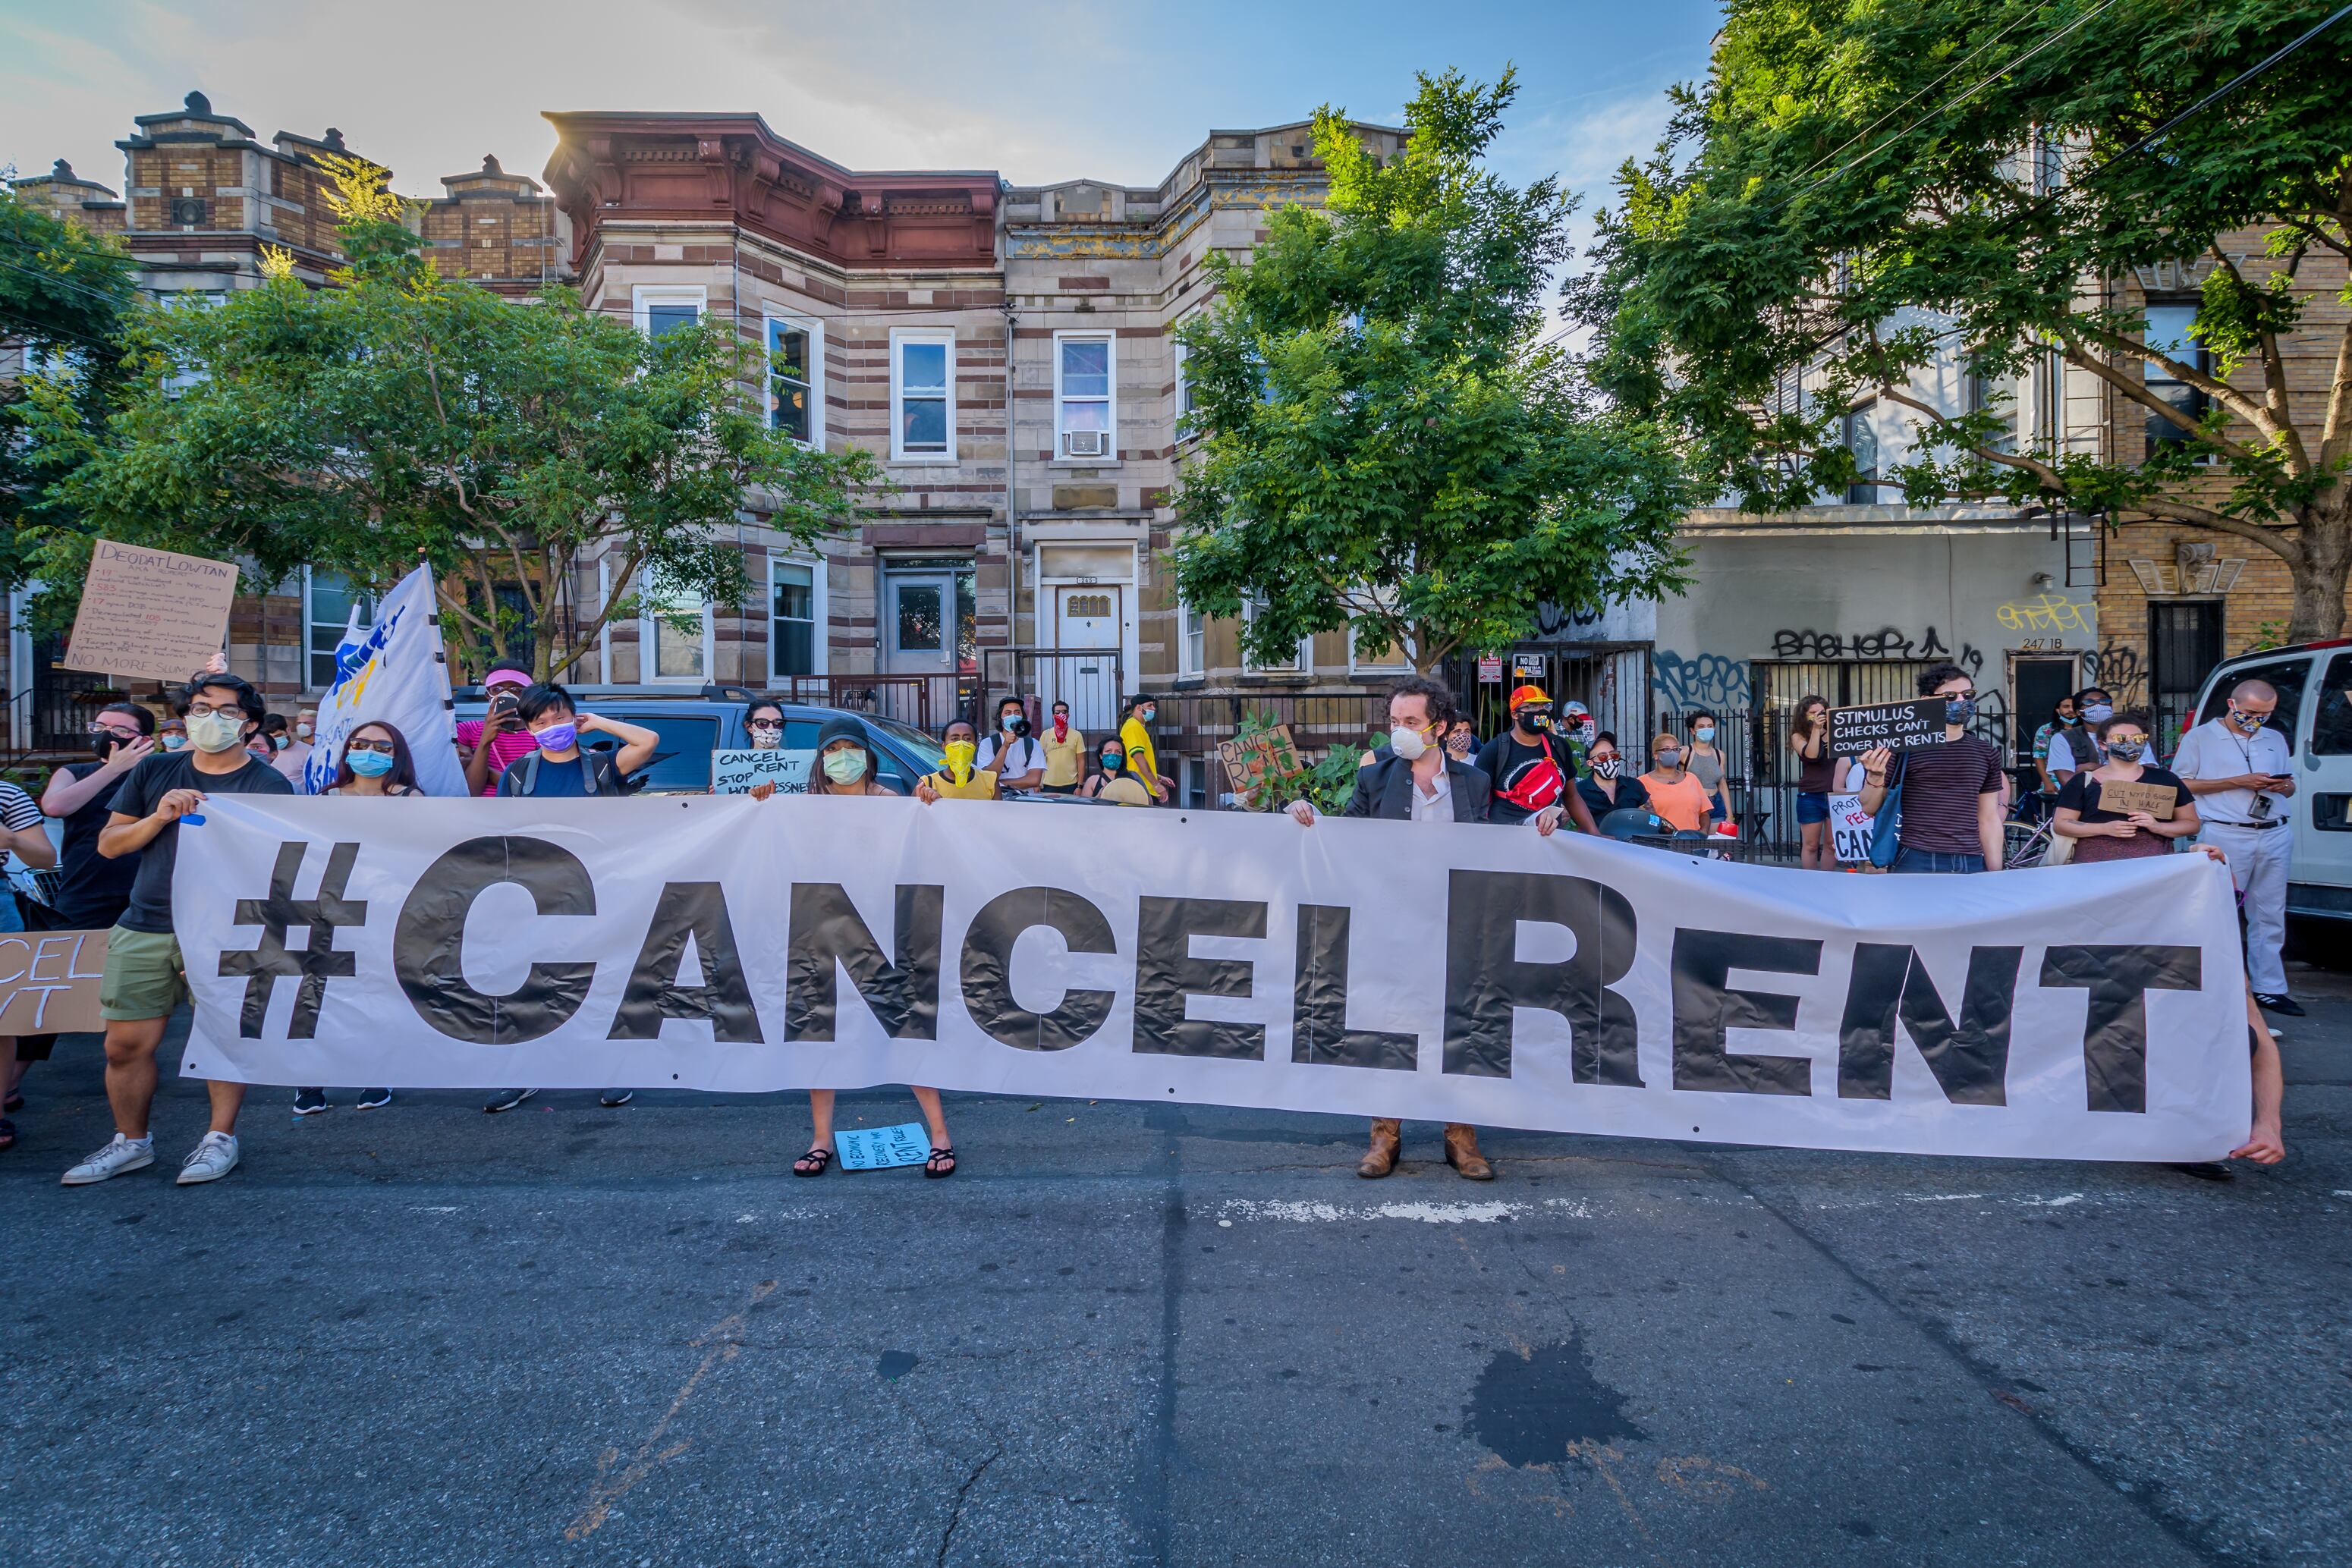 People in Brooklyn seeking to cancel rent payments during the pandemic, in July 2020.